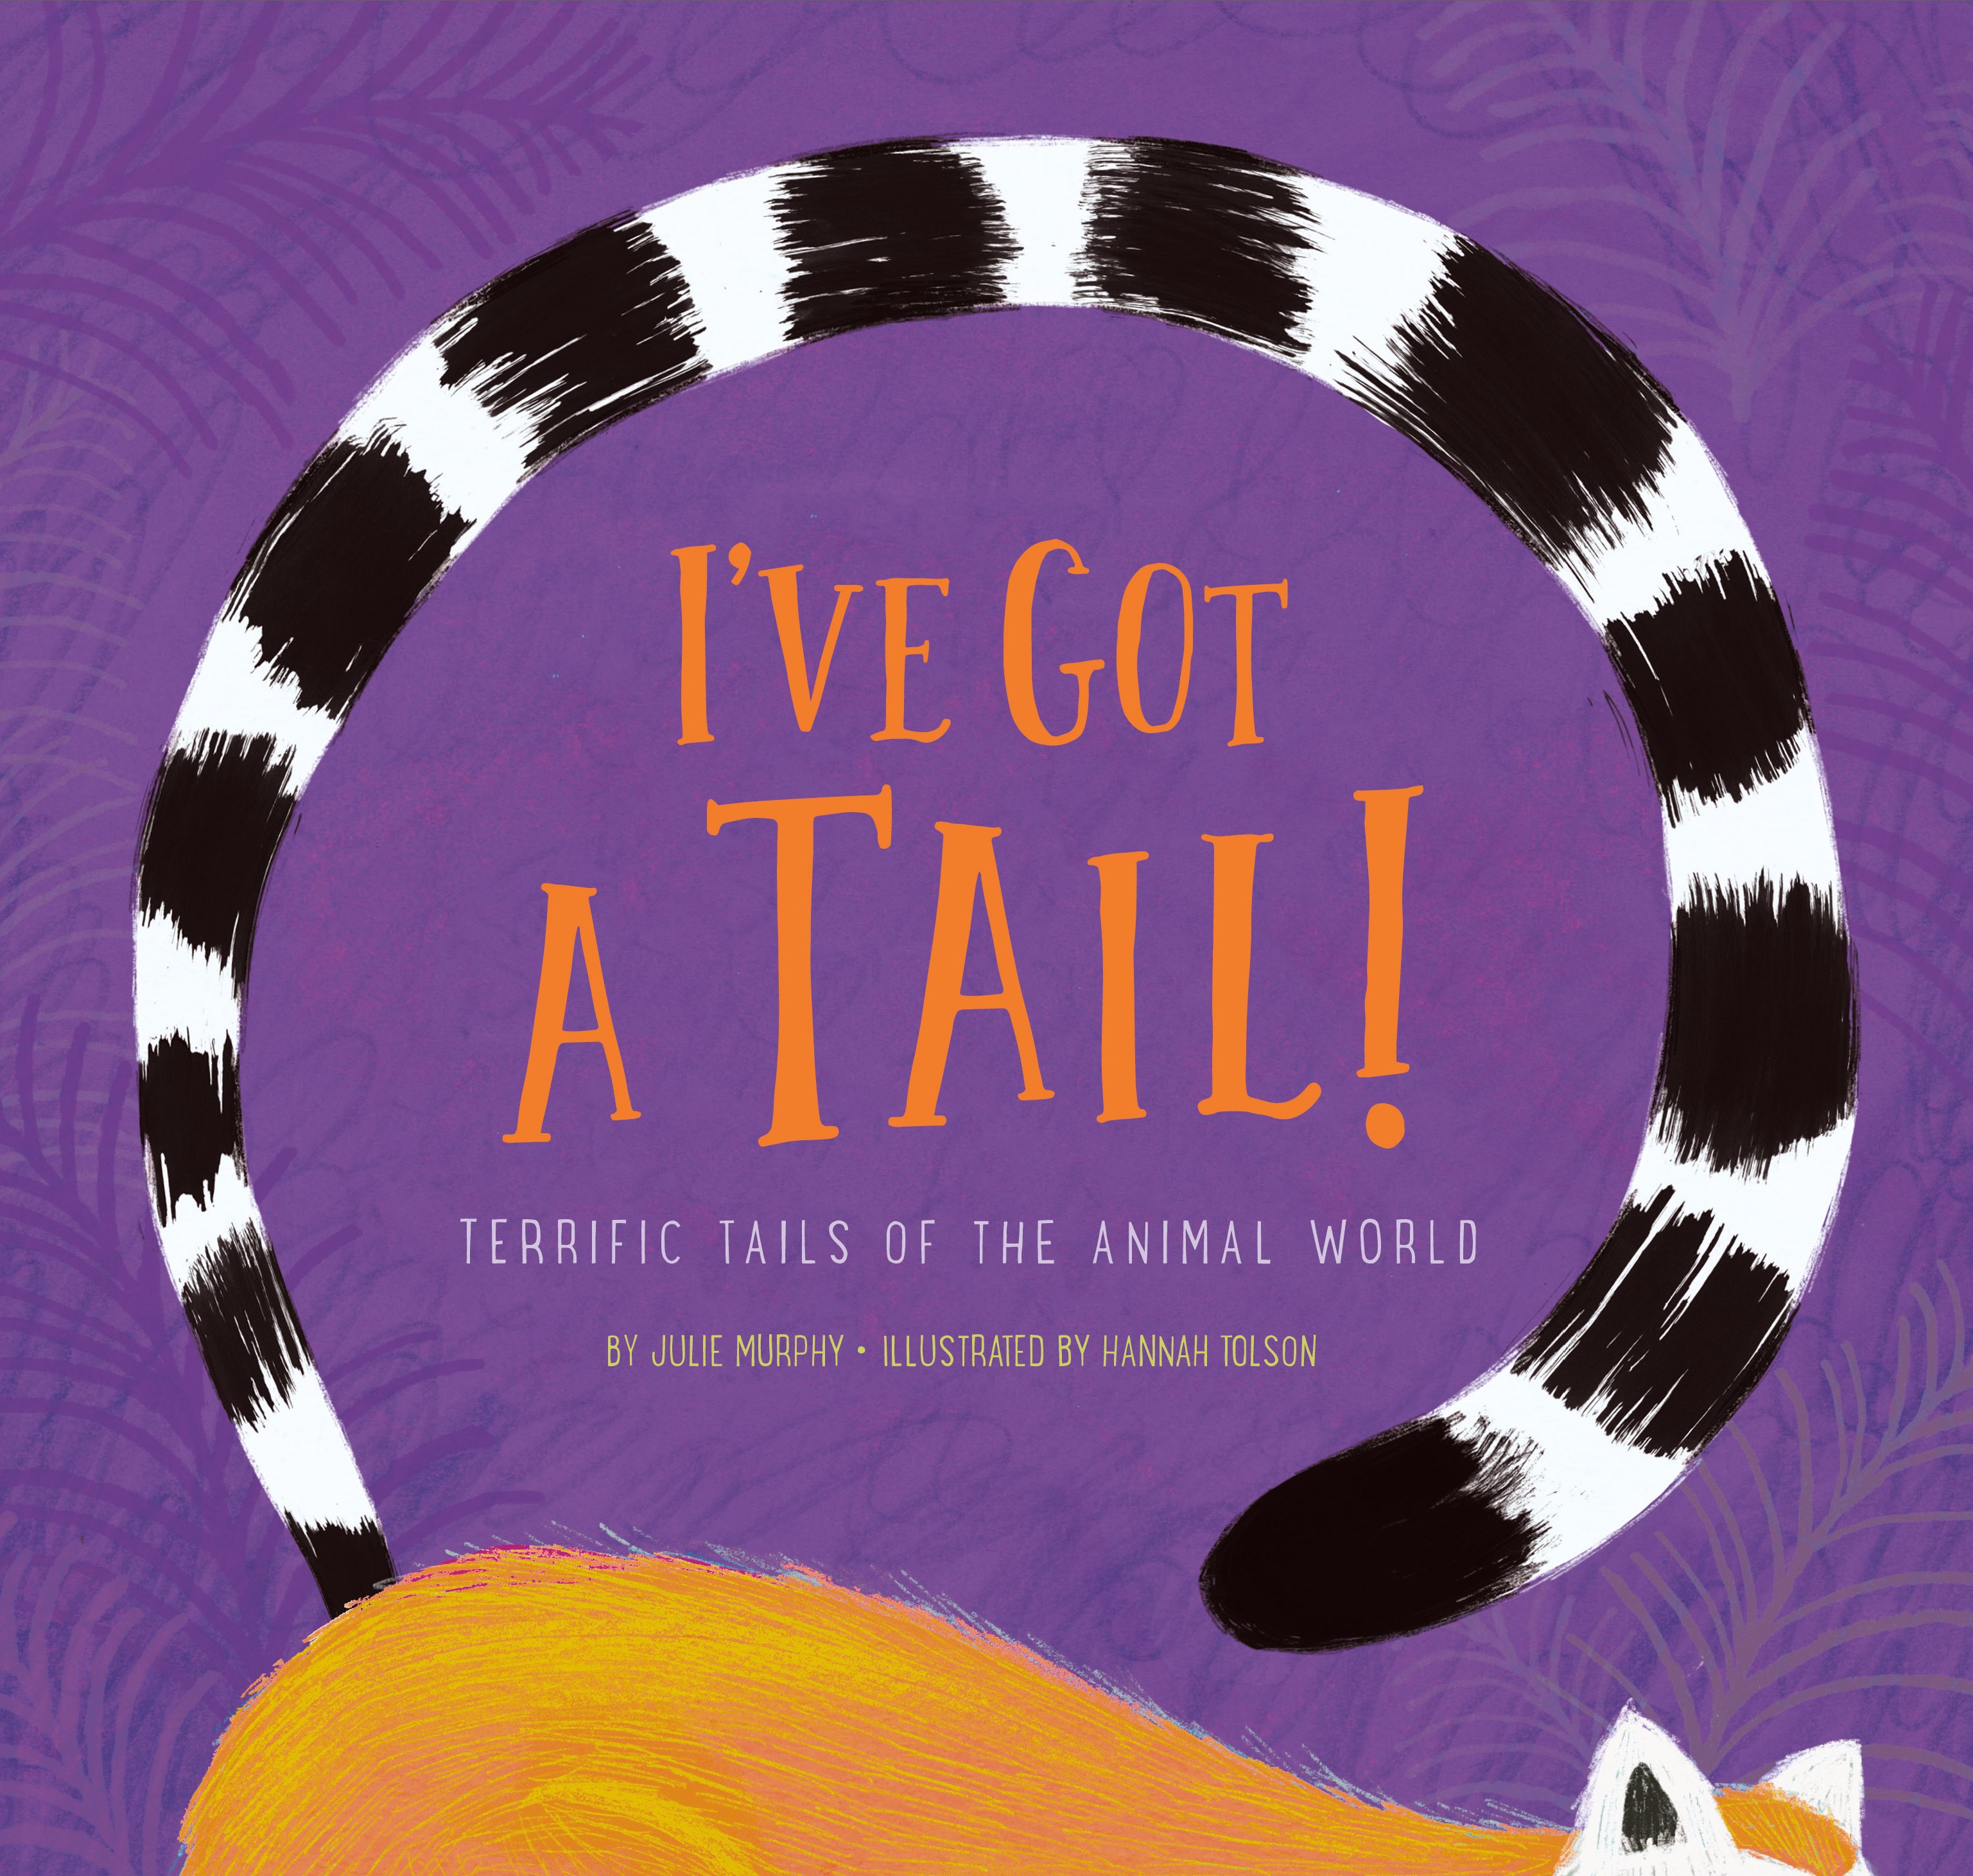 I’VE GOT A TAIL! TERRIFIC TAILS OF THE ANIMAL WORLD